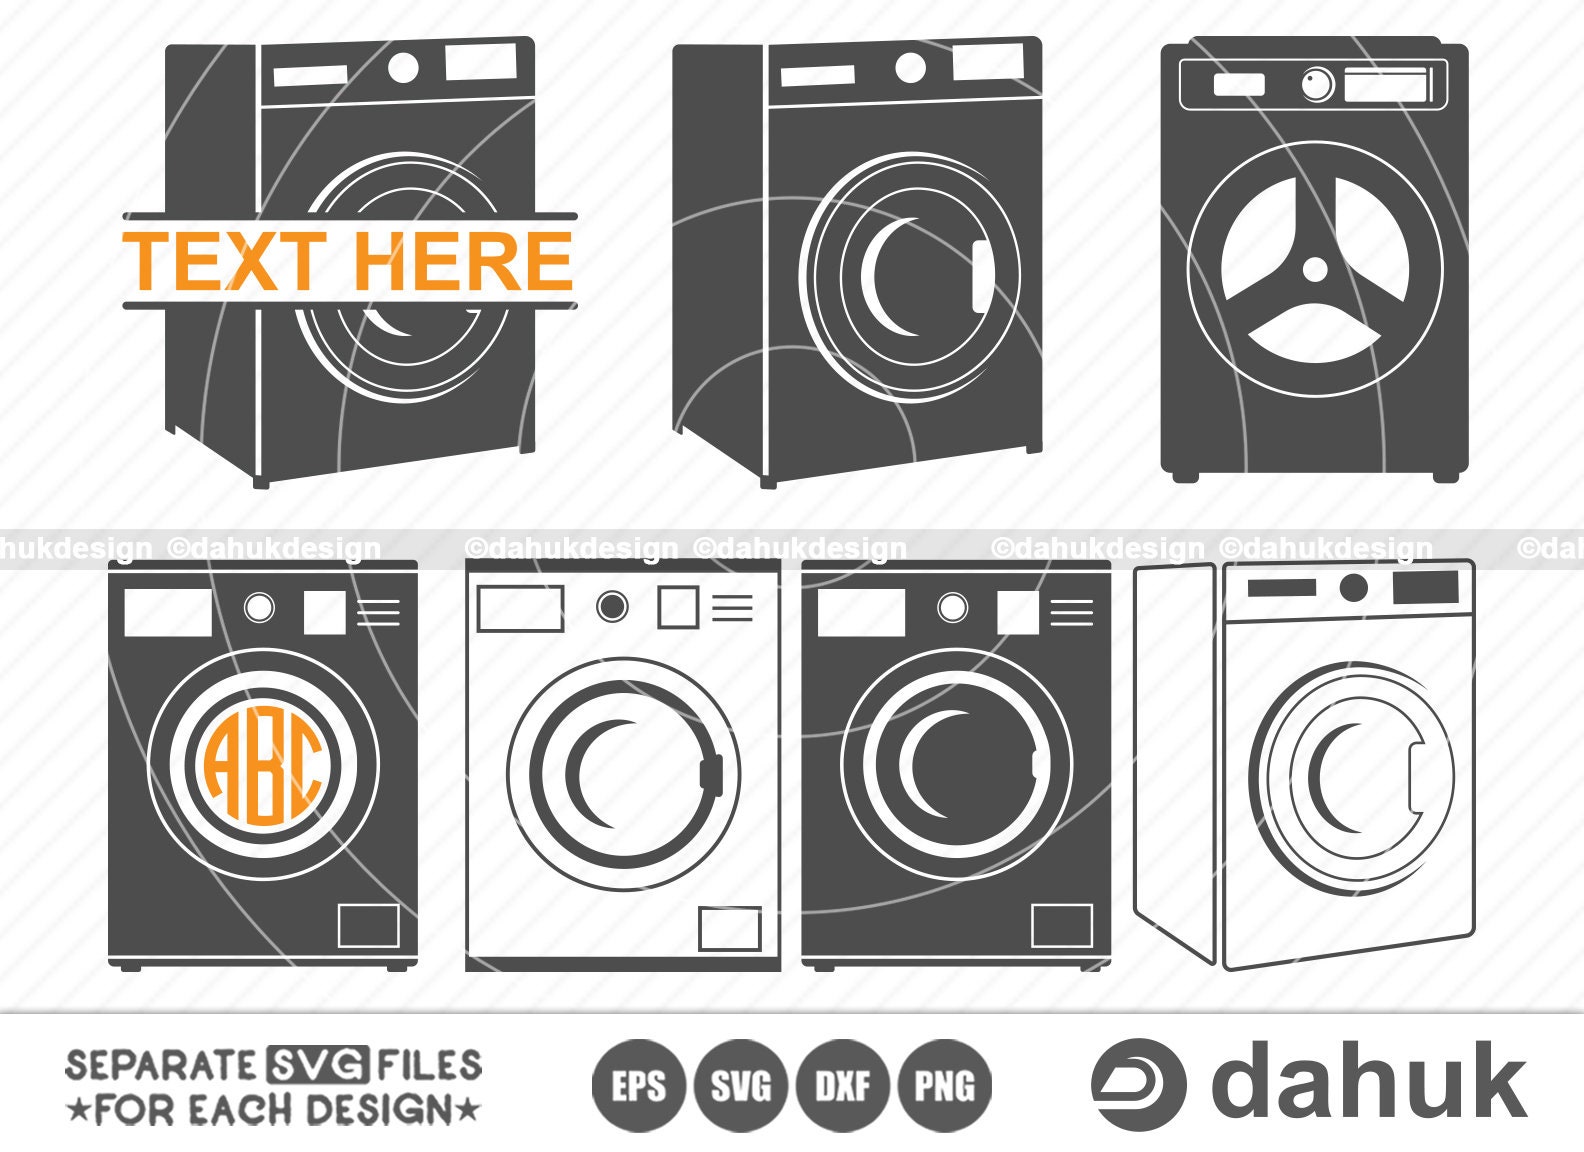 Washing Machine Svg, Laundry Png, Washer Clipart, Laundry Machine Dxf,  Laundry Eps, Laundry Cricut, Washer Cut File, Washer Silhouette 